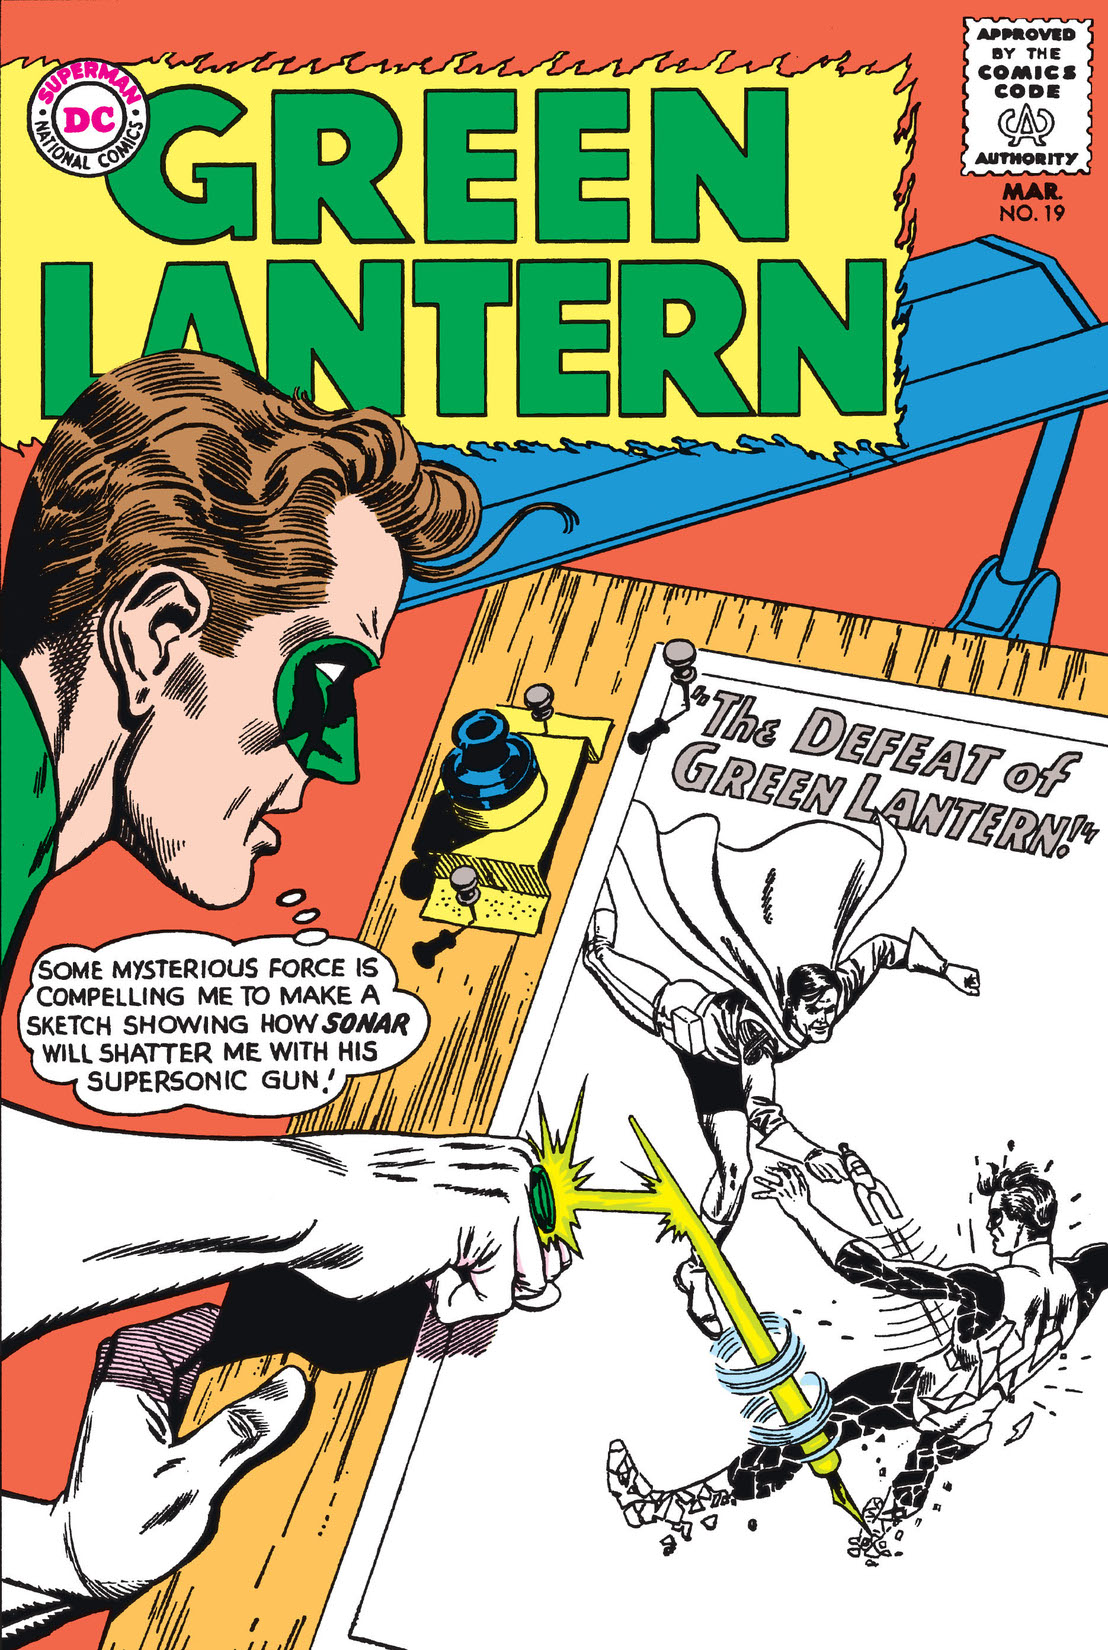 Green Lantern (1960-) #19 preview images